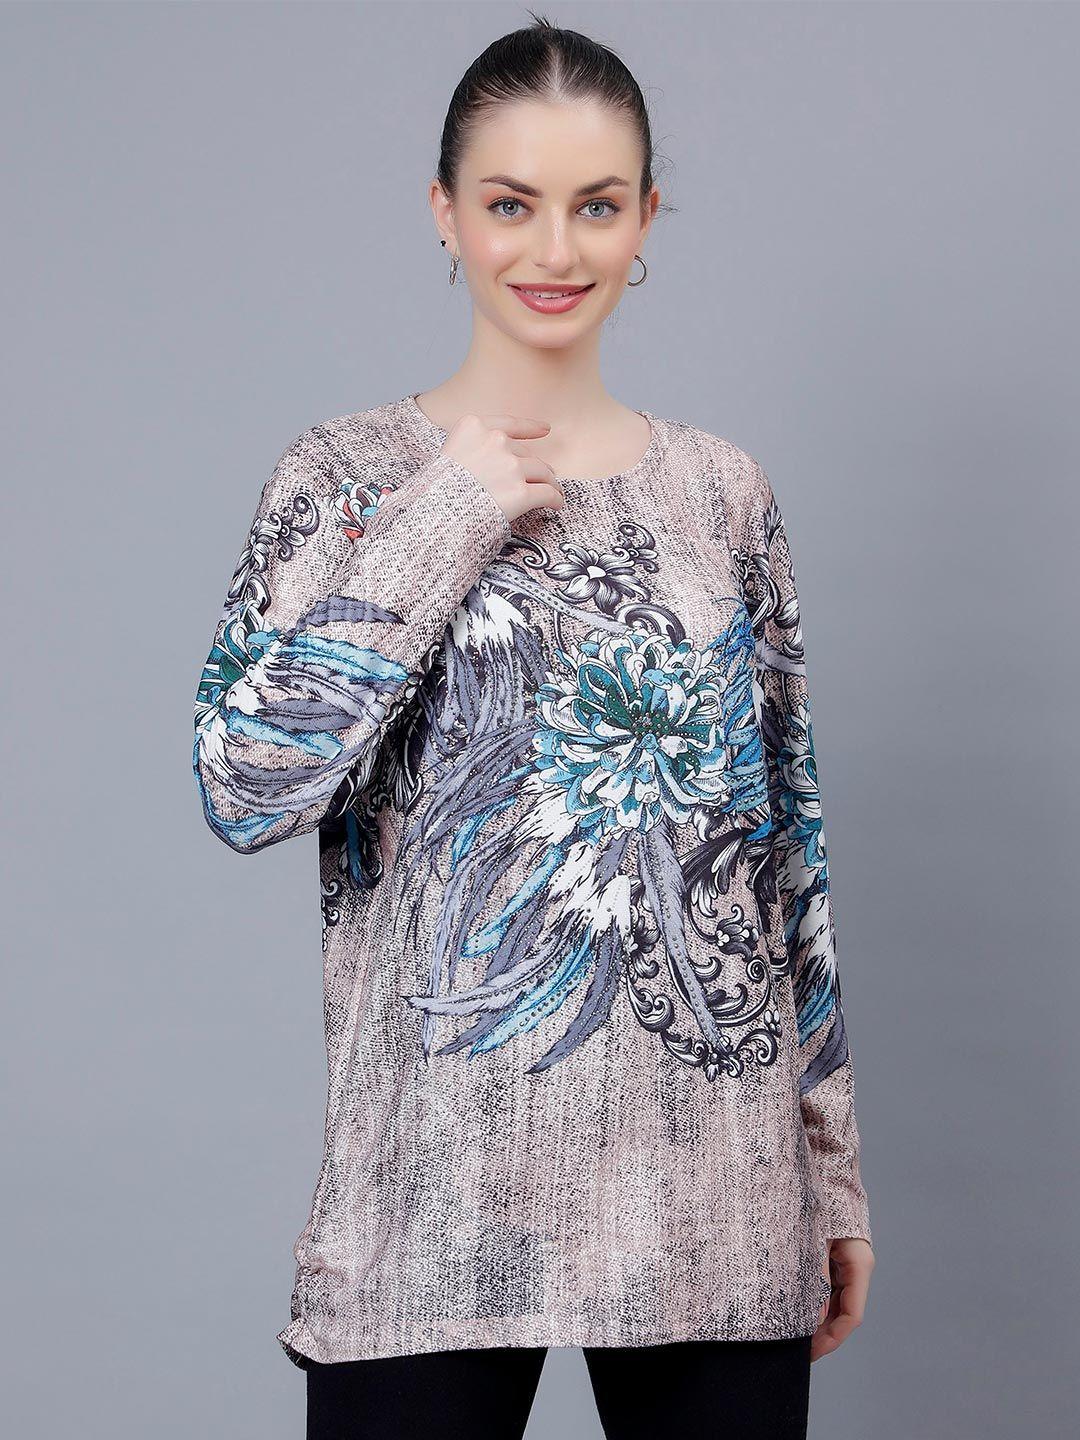 albion floral printed round neck long sleeve tops